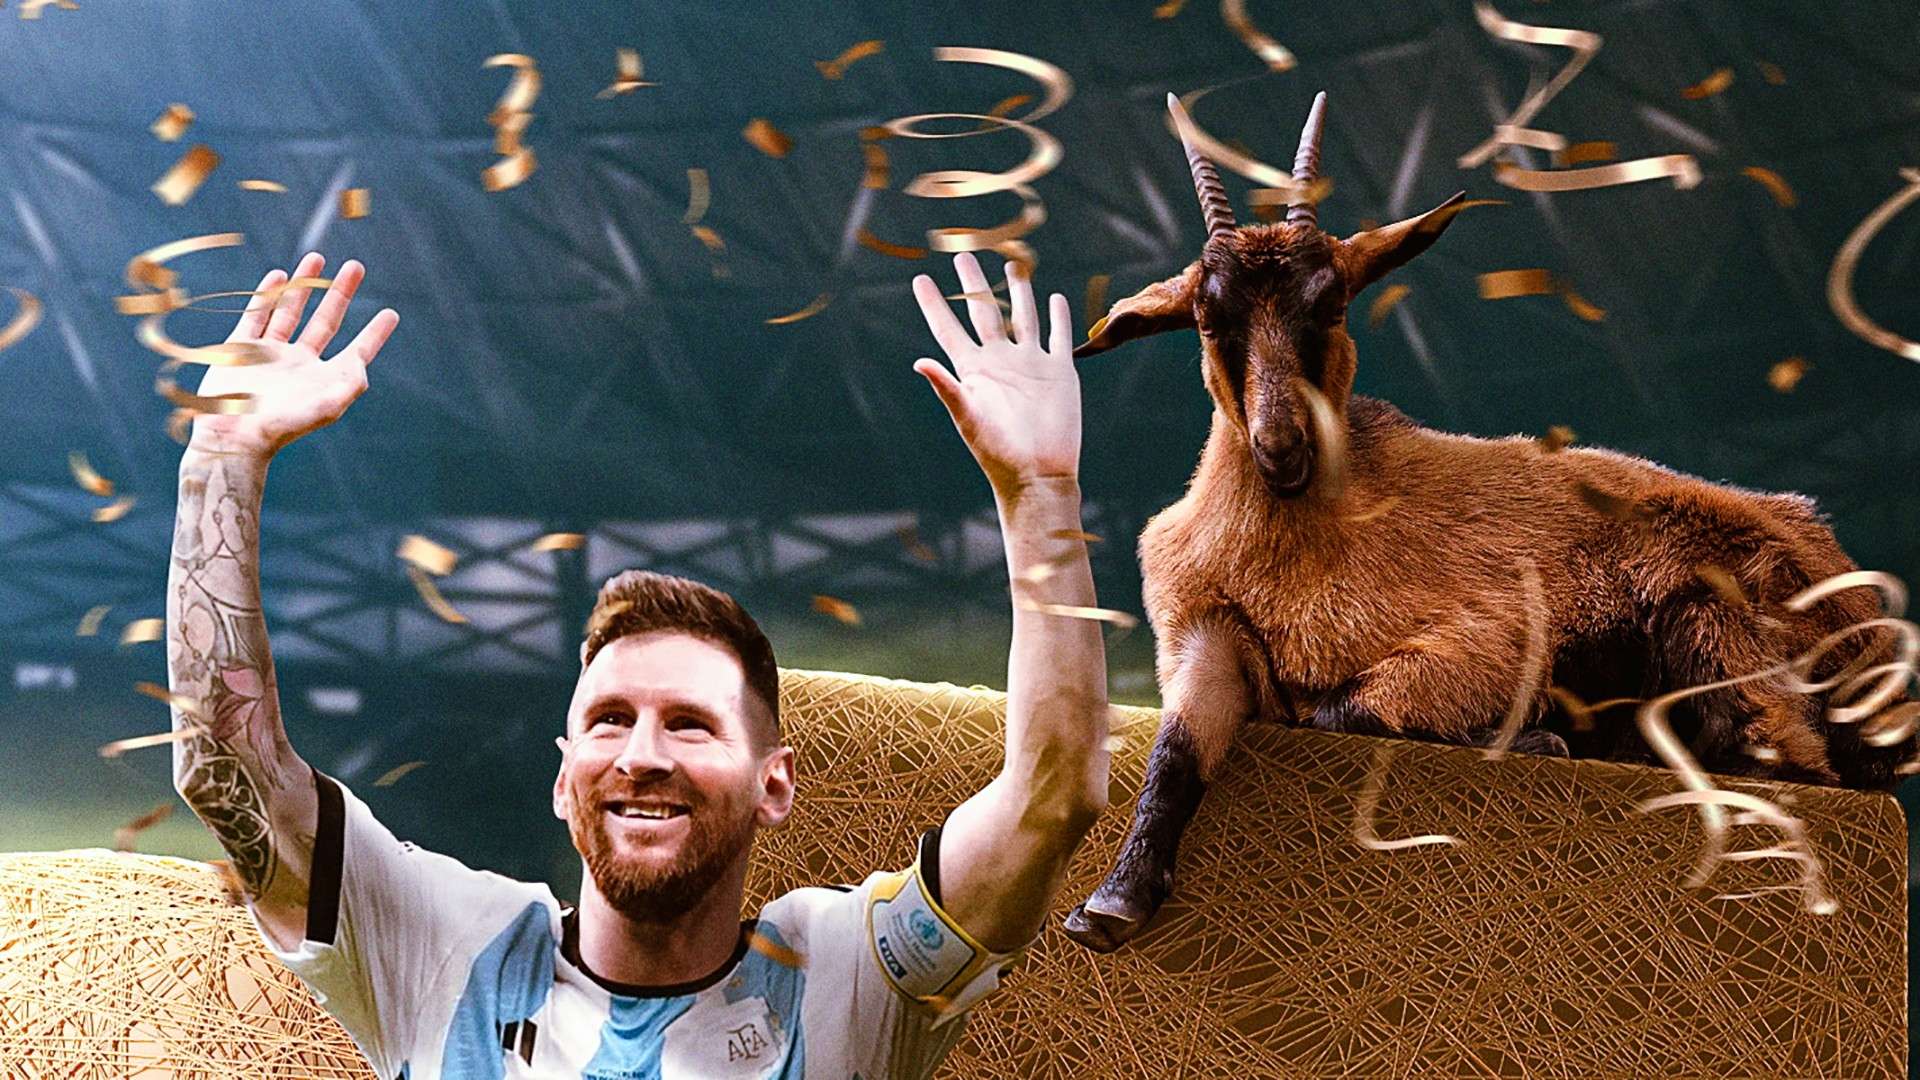 Lionel Messi in an Argentina jersey with a goat